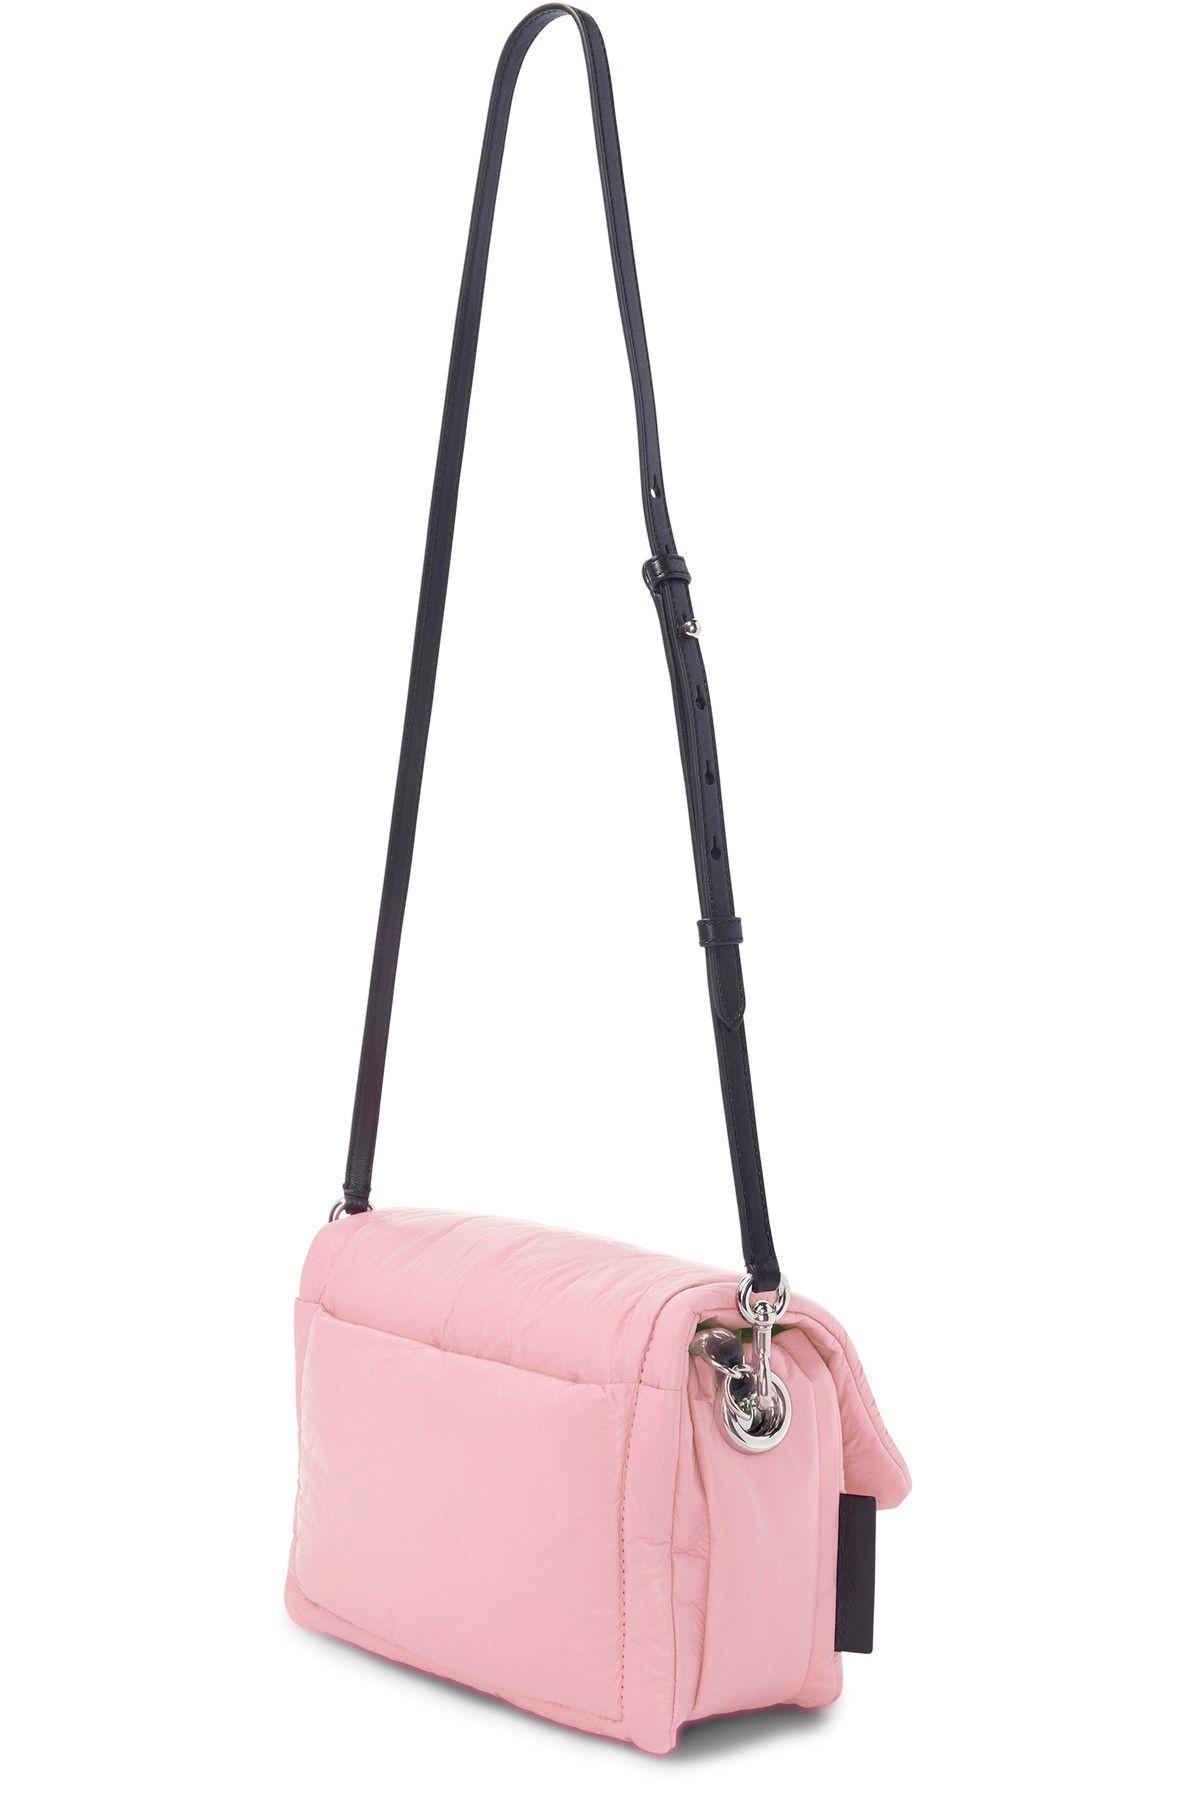 Cross body bags Marc Jacobs - The Pillow bag in Powder Pink